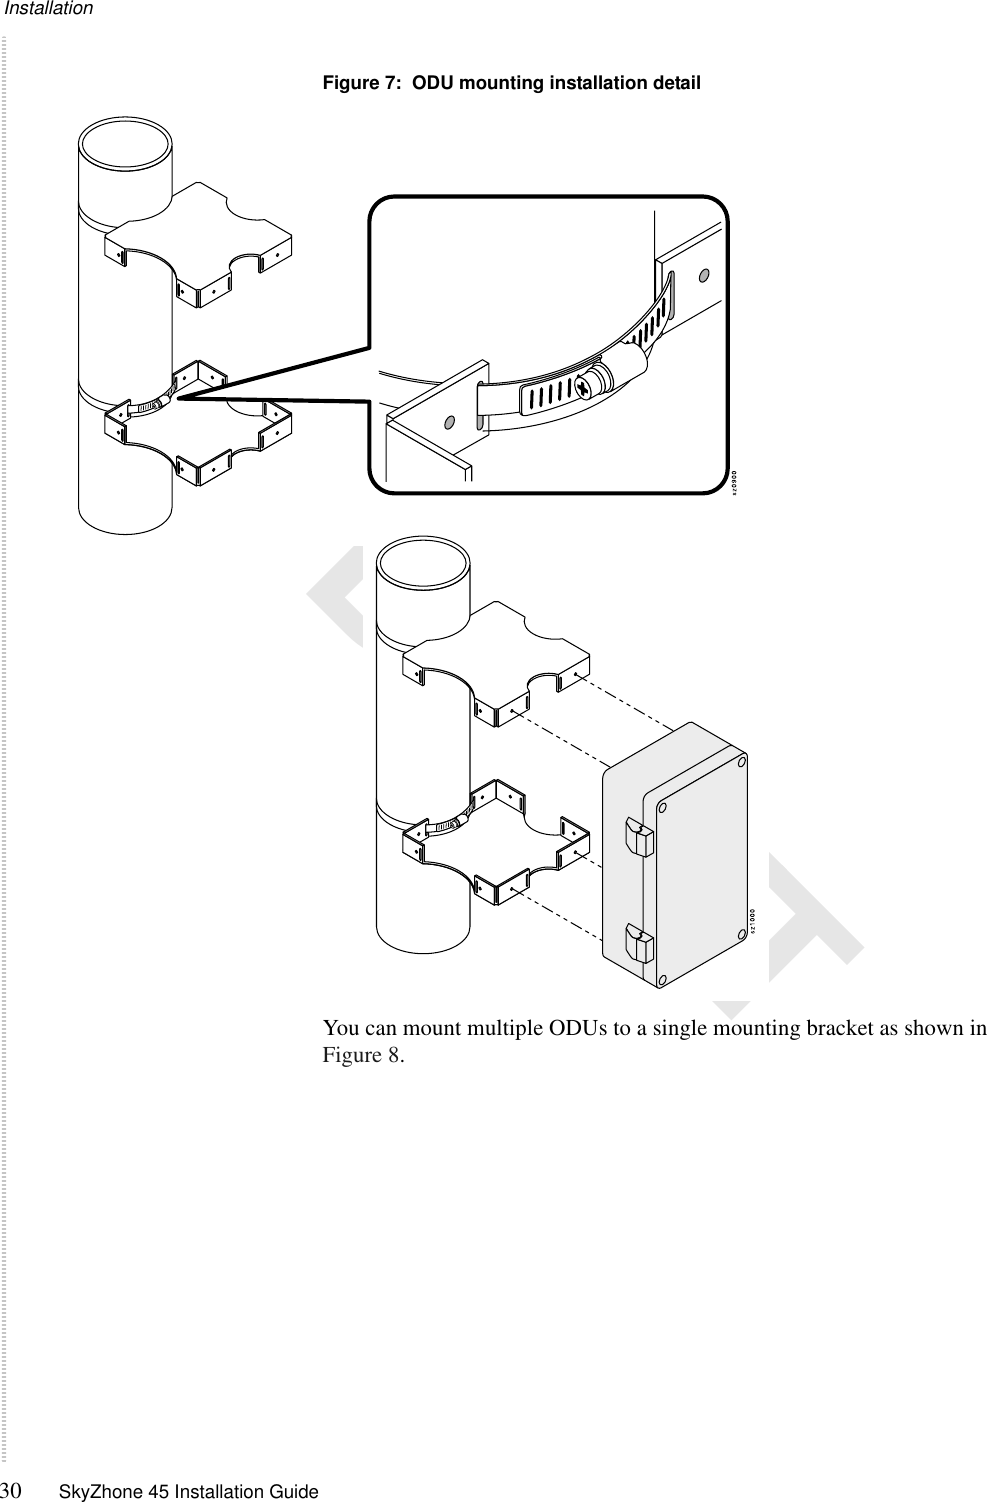 Installation30 SkyZhone 45 Installation Guide DRAFTFigure 7:  ODU mounting installation detailYou can mount multiple ODUs to a single mounting bracket as shown in Figure 8.